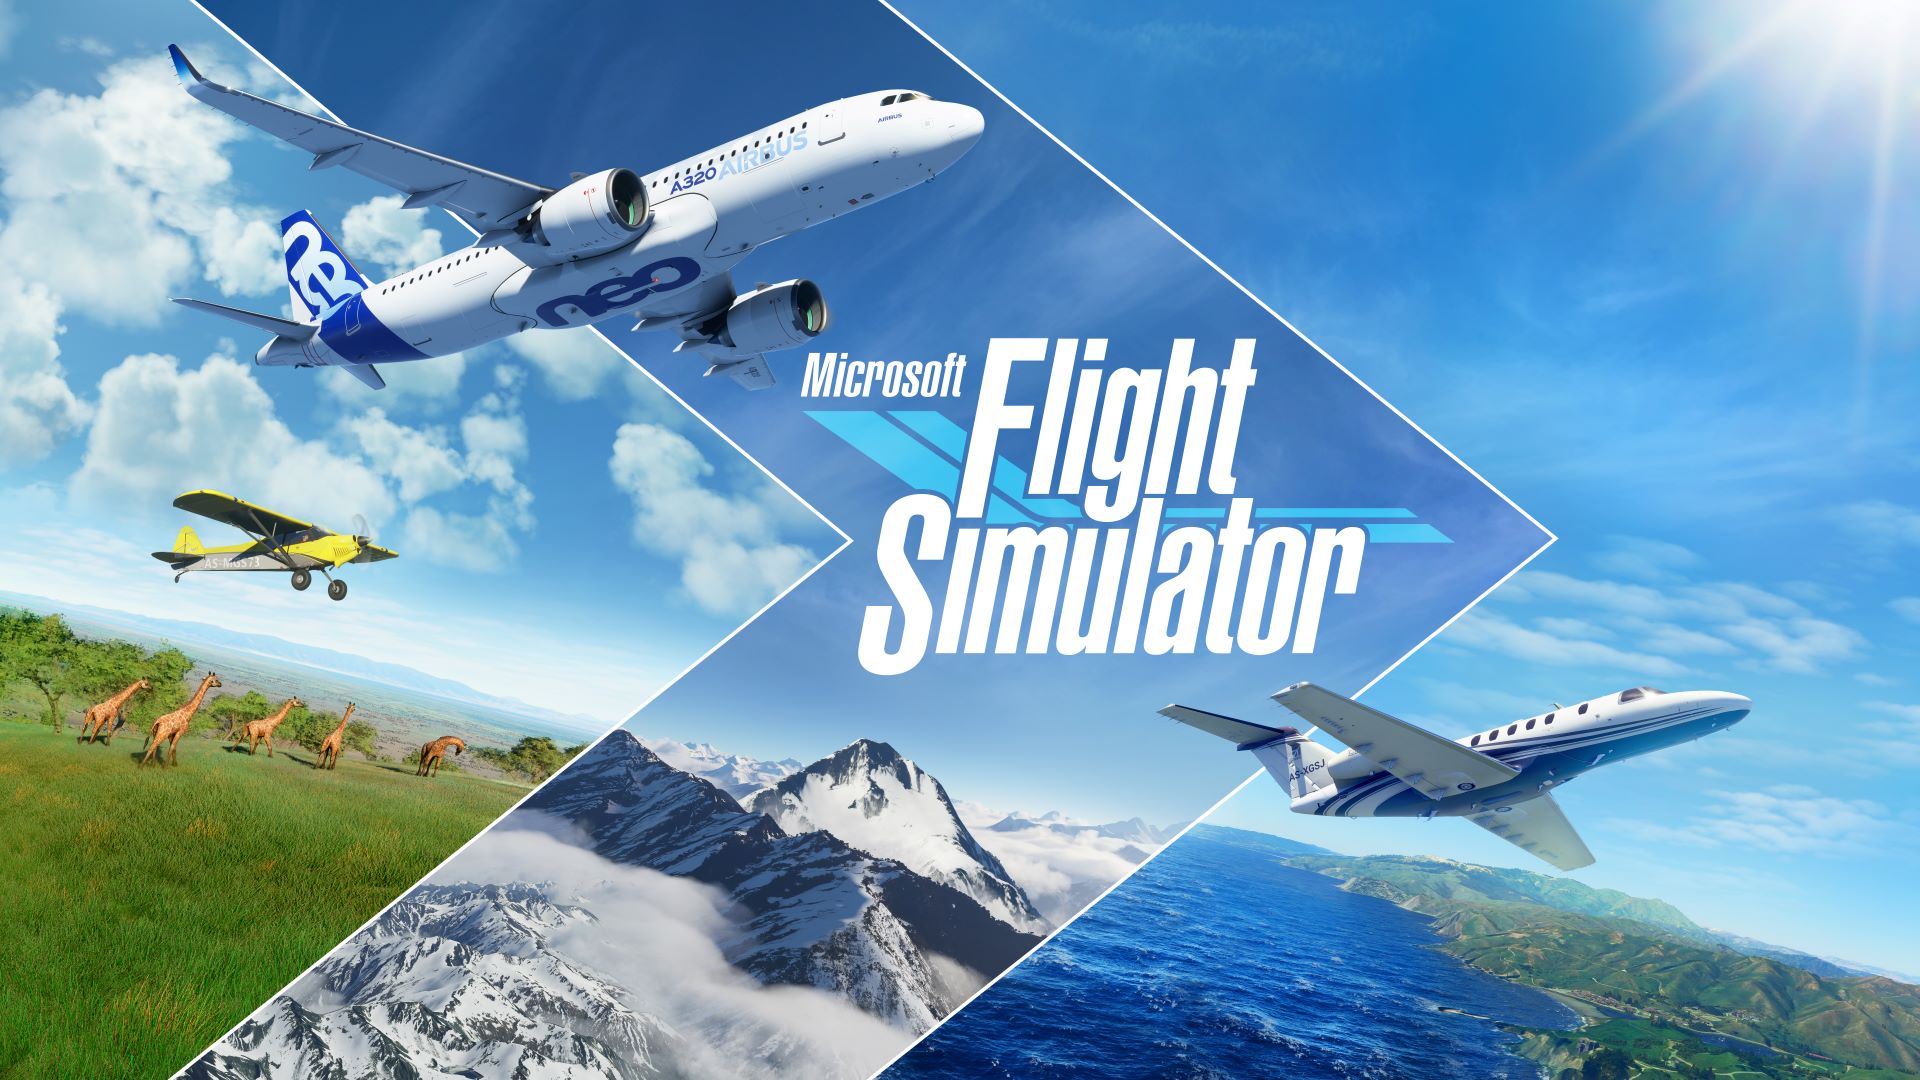 Microsoft Flight Simulator Set for Launch on August 18 for PC, also with Xbox Game Pass for PC (Beta)